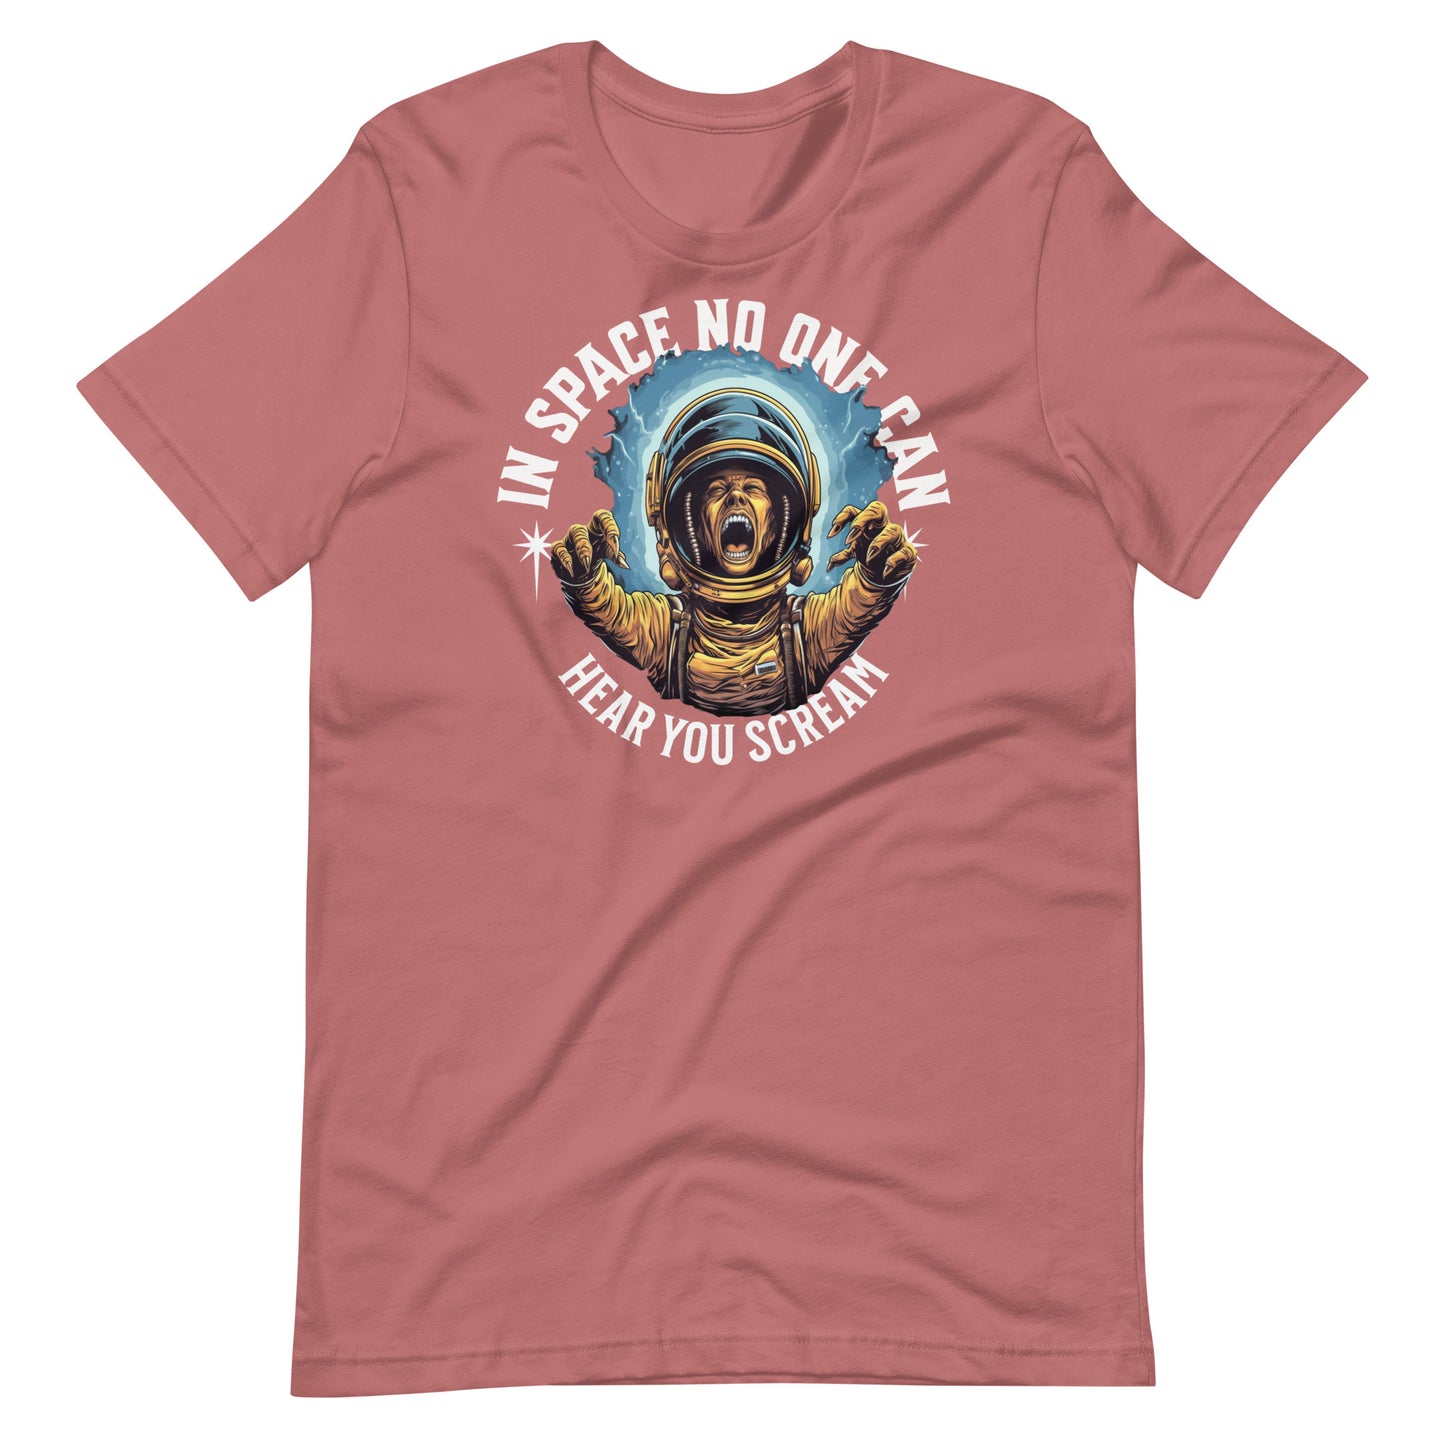 Extraterrestrial Scream: In Space No One Can Hear You Scream T-Shirt